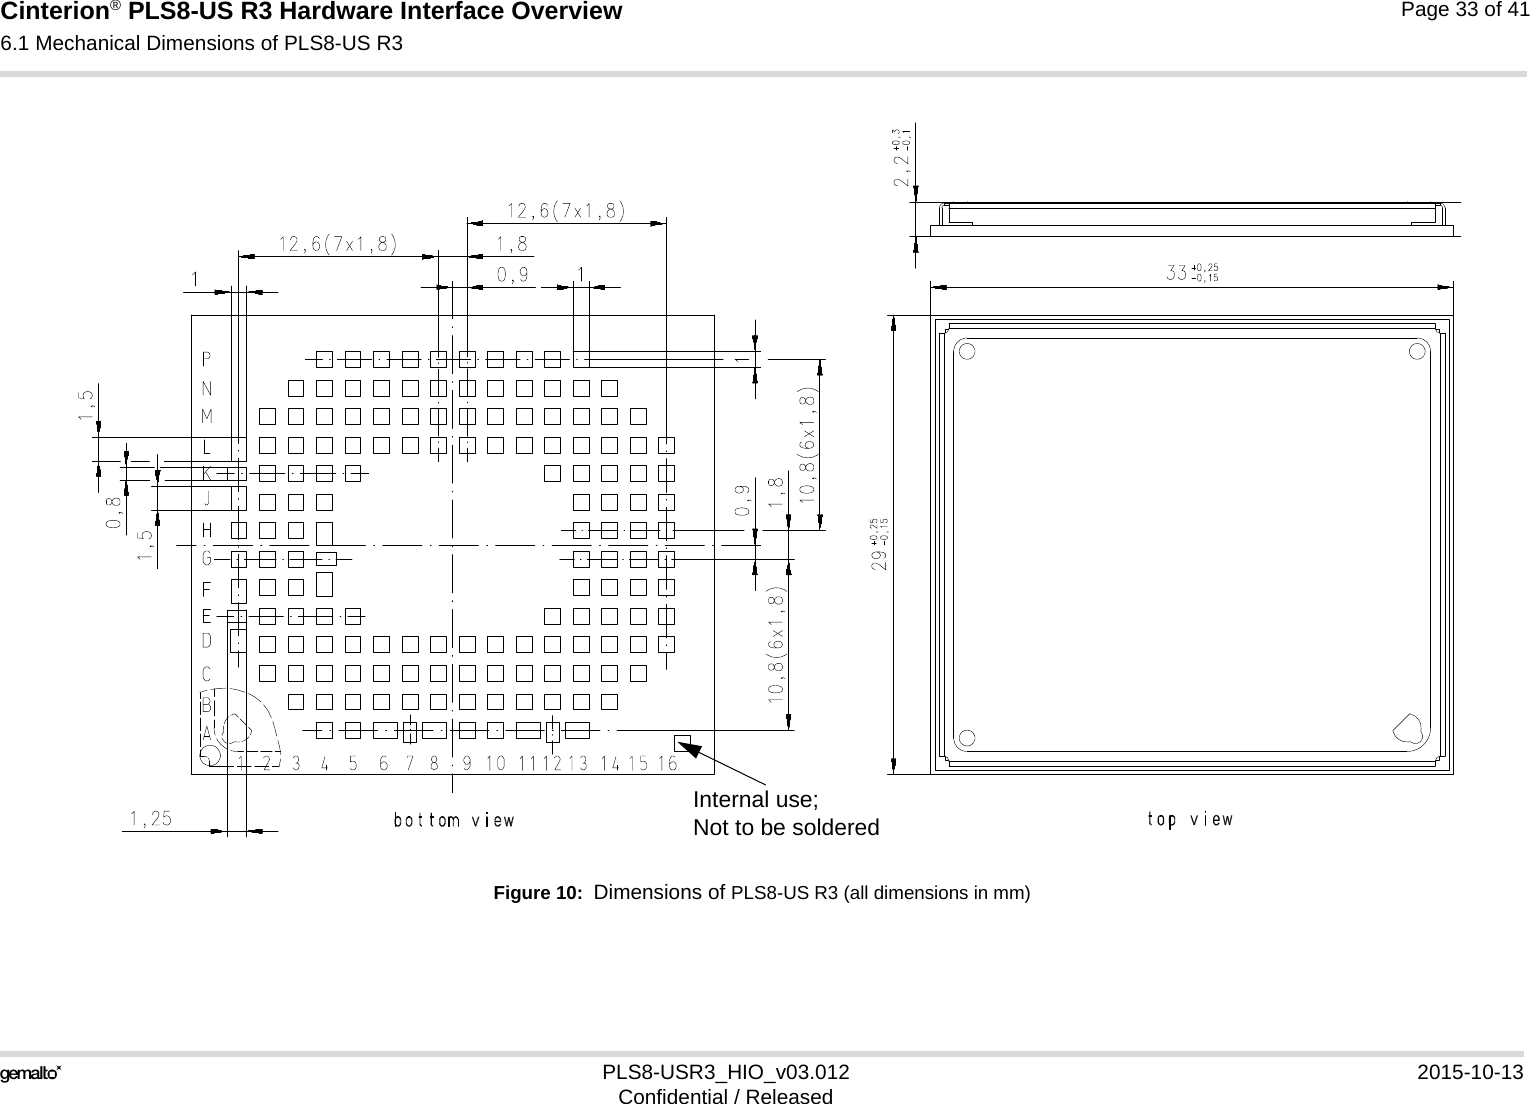 Cinterion® PLS8-US R3 Hardware Interface Overview6.1 Mechanical Dimensions of PLS8-US R333PLS8-USR3_HIO_v03.012 2015-10-13Confidential / ReleasedPage 33 of 41Figure 10:  Dimensions of PLS8-US R3 (all dimensions in mm)Internal use; Not to be soldered